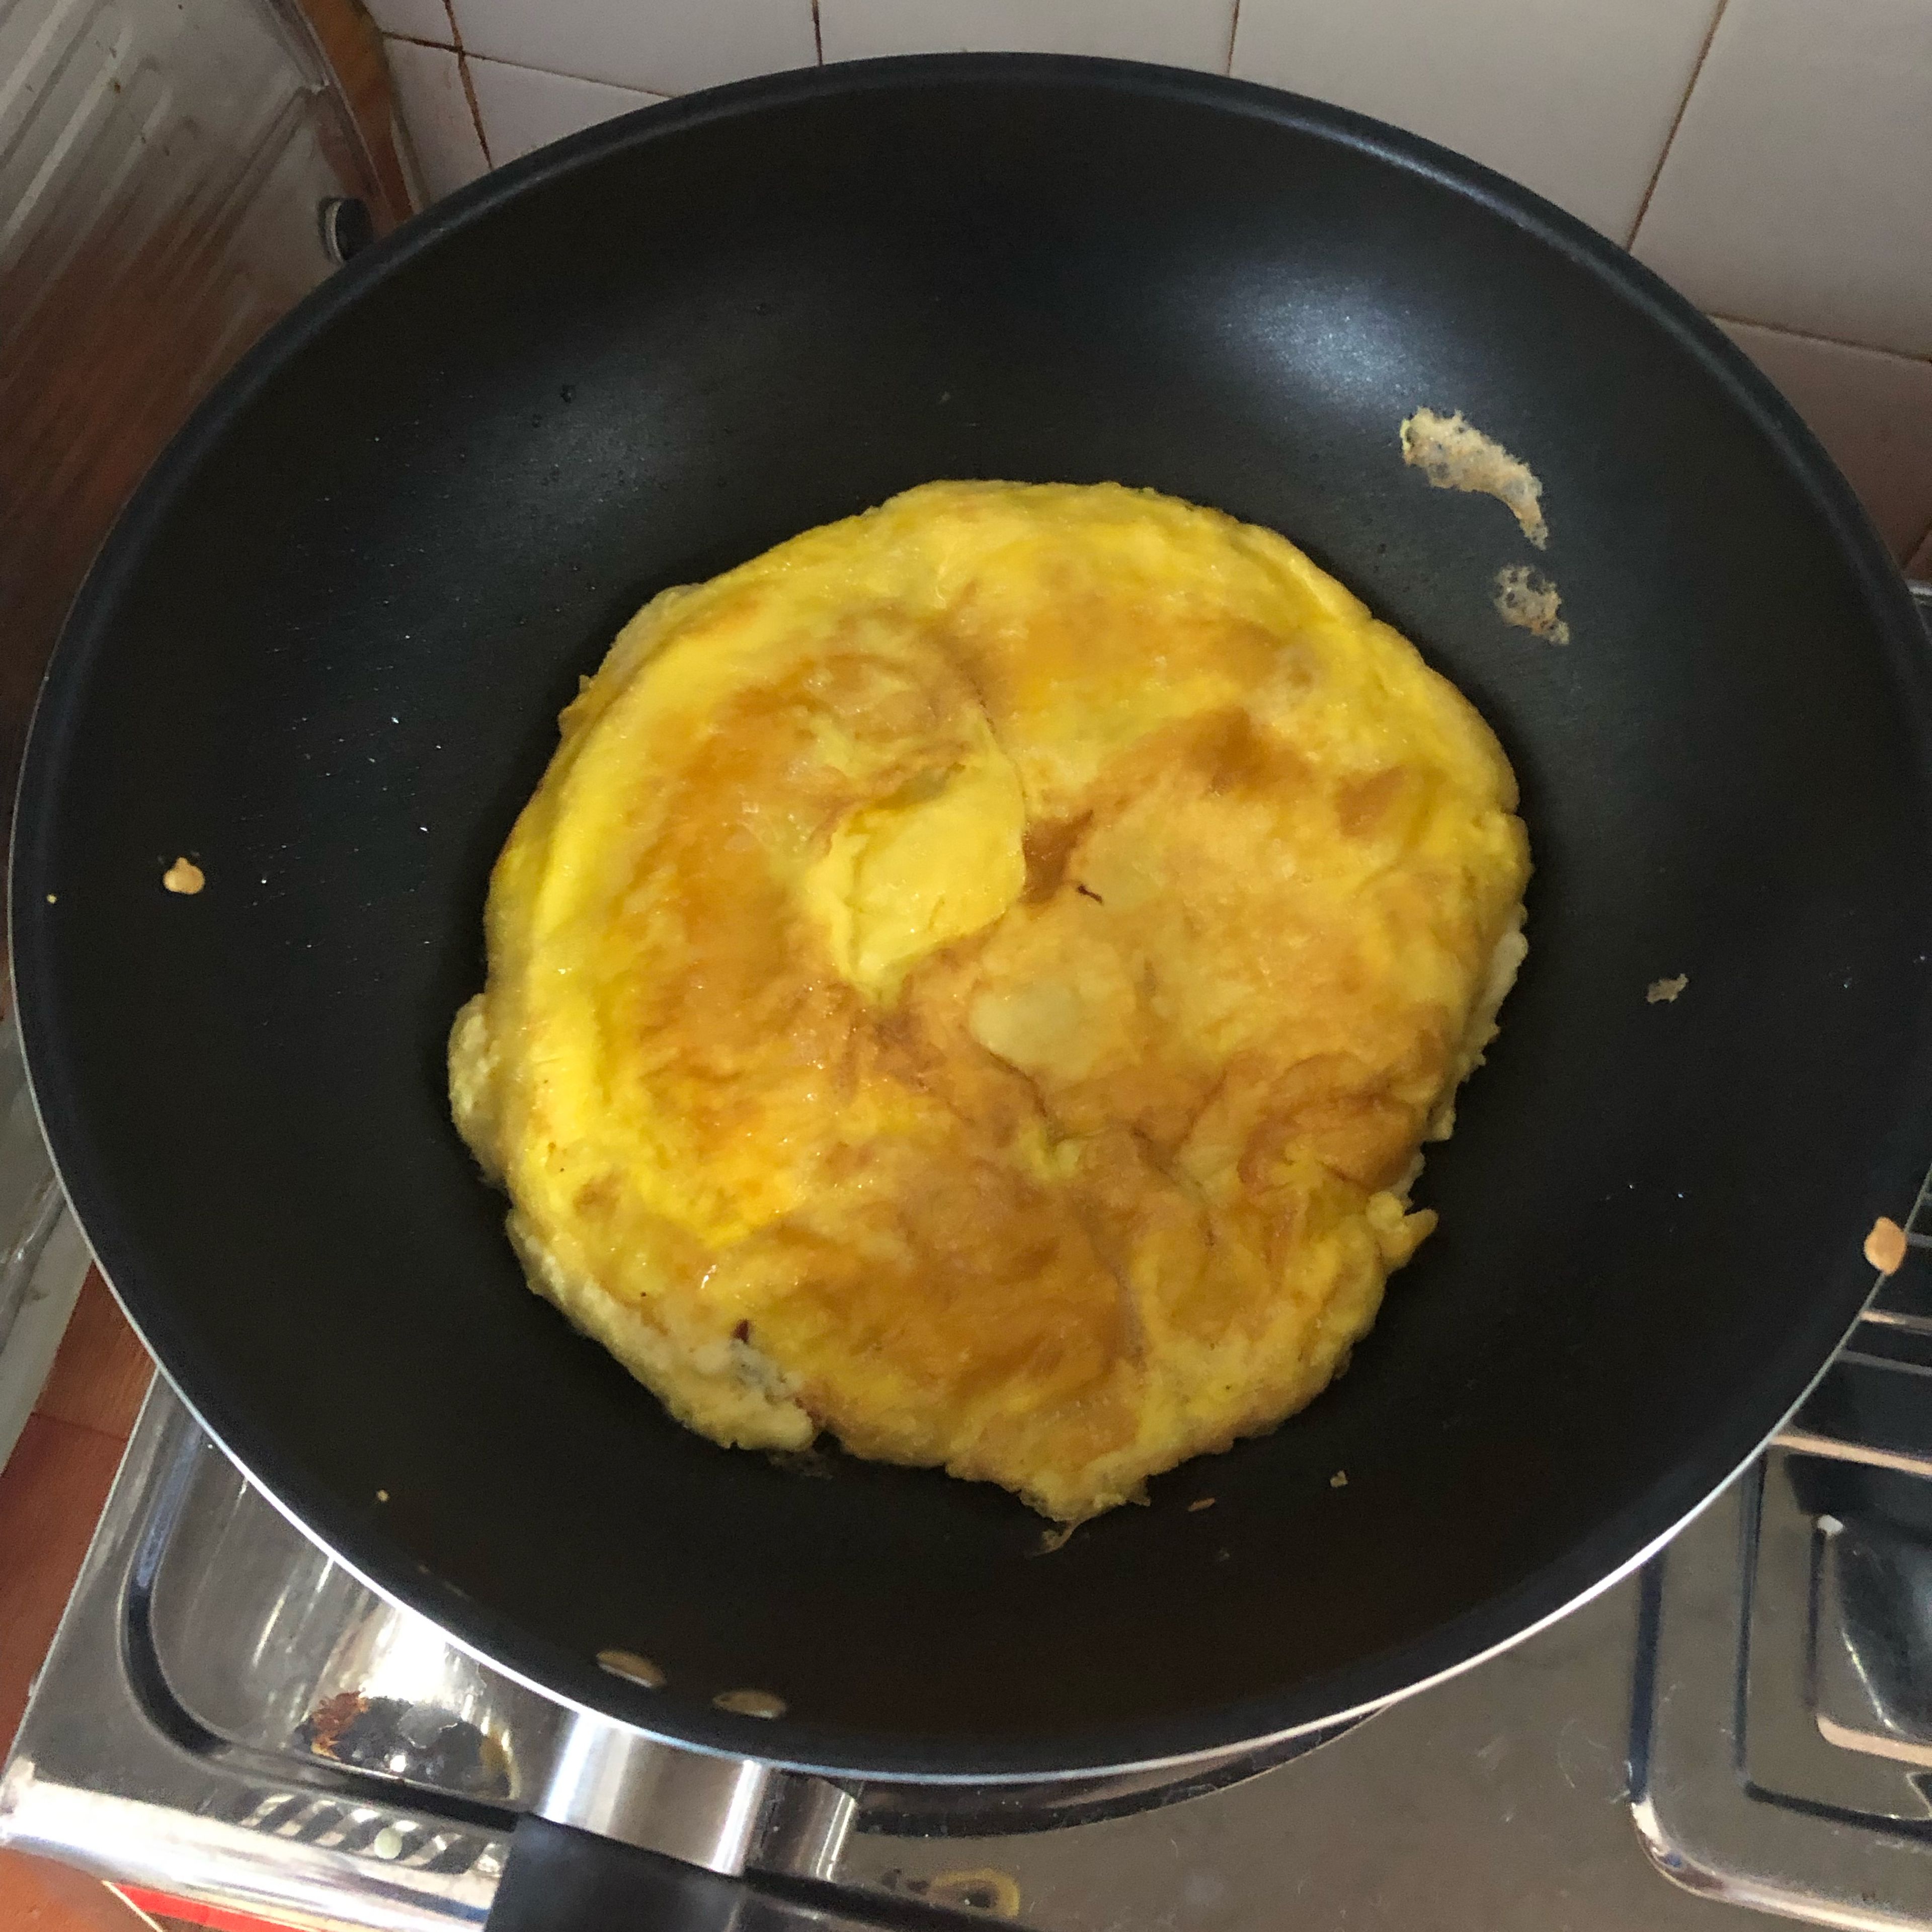 Add some oil into the frying pan and put it on medium heat. Pour the egg mixture in and flip the egg after the bottom has turn golden